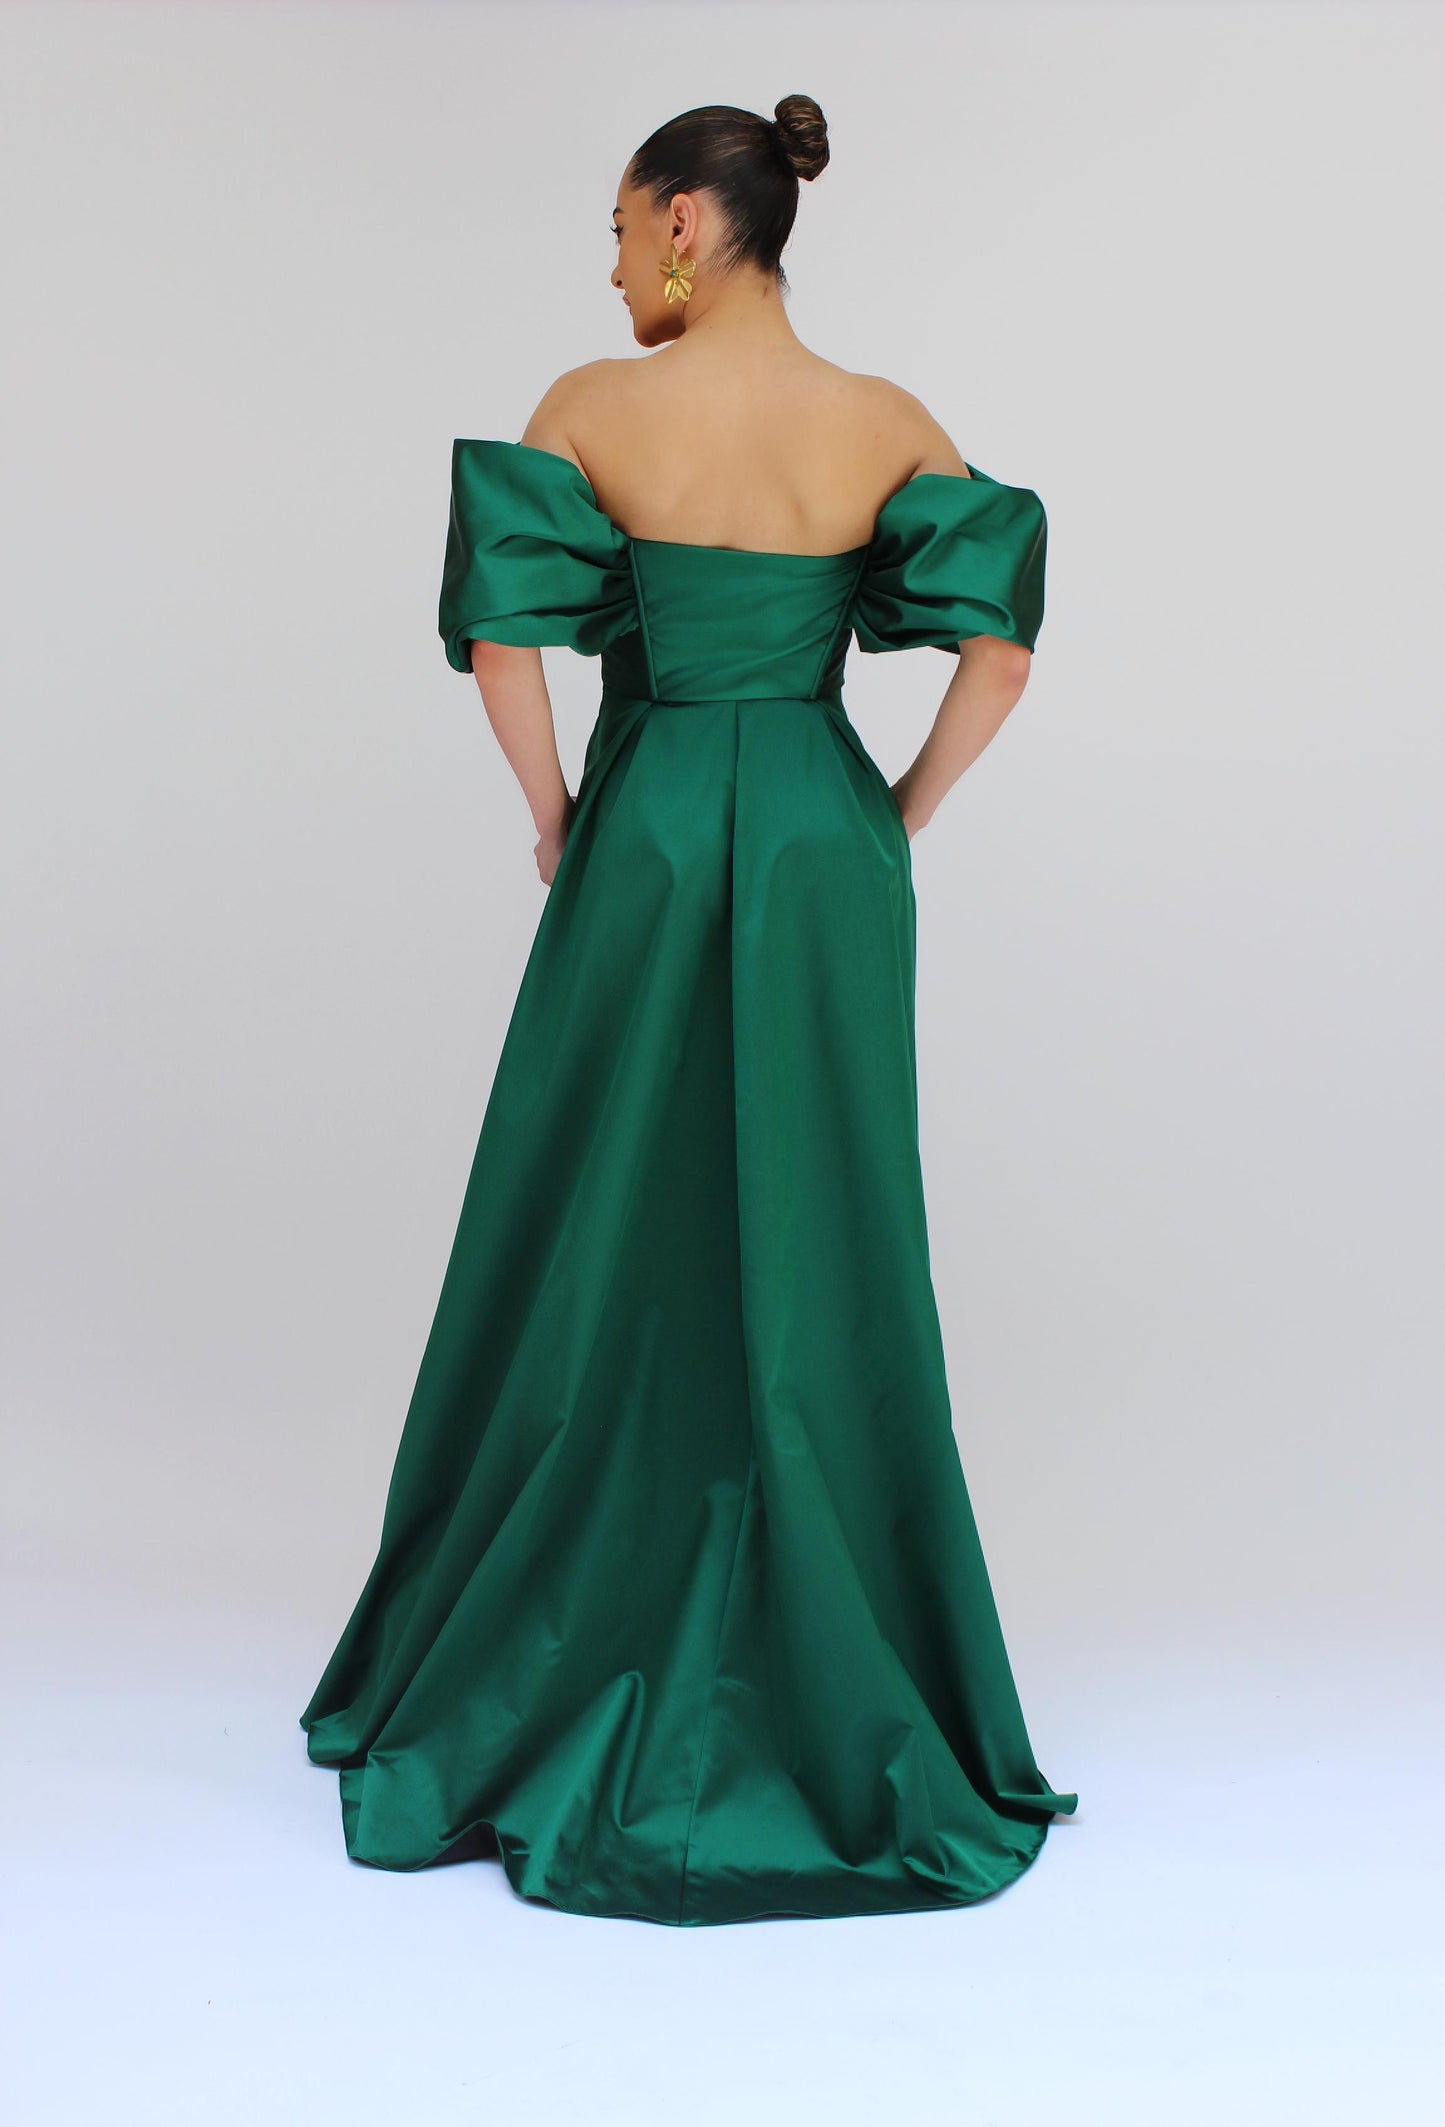 *Pre-Order Midnight gala of the shoulder gown